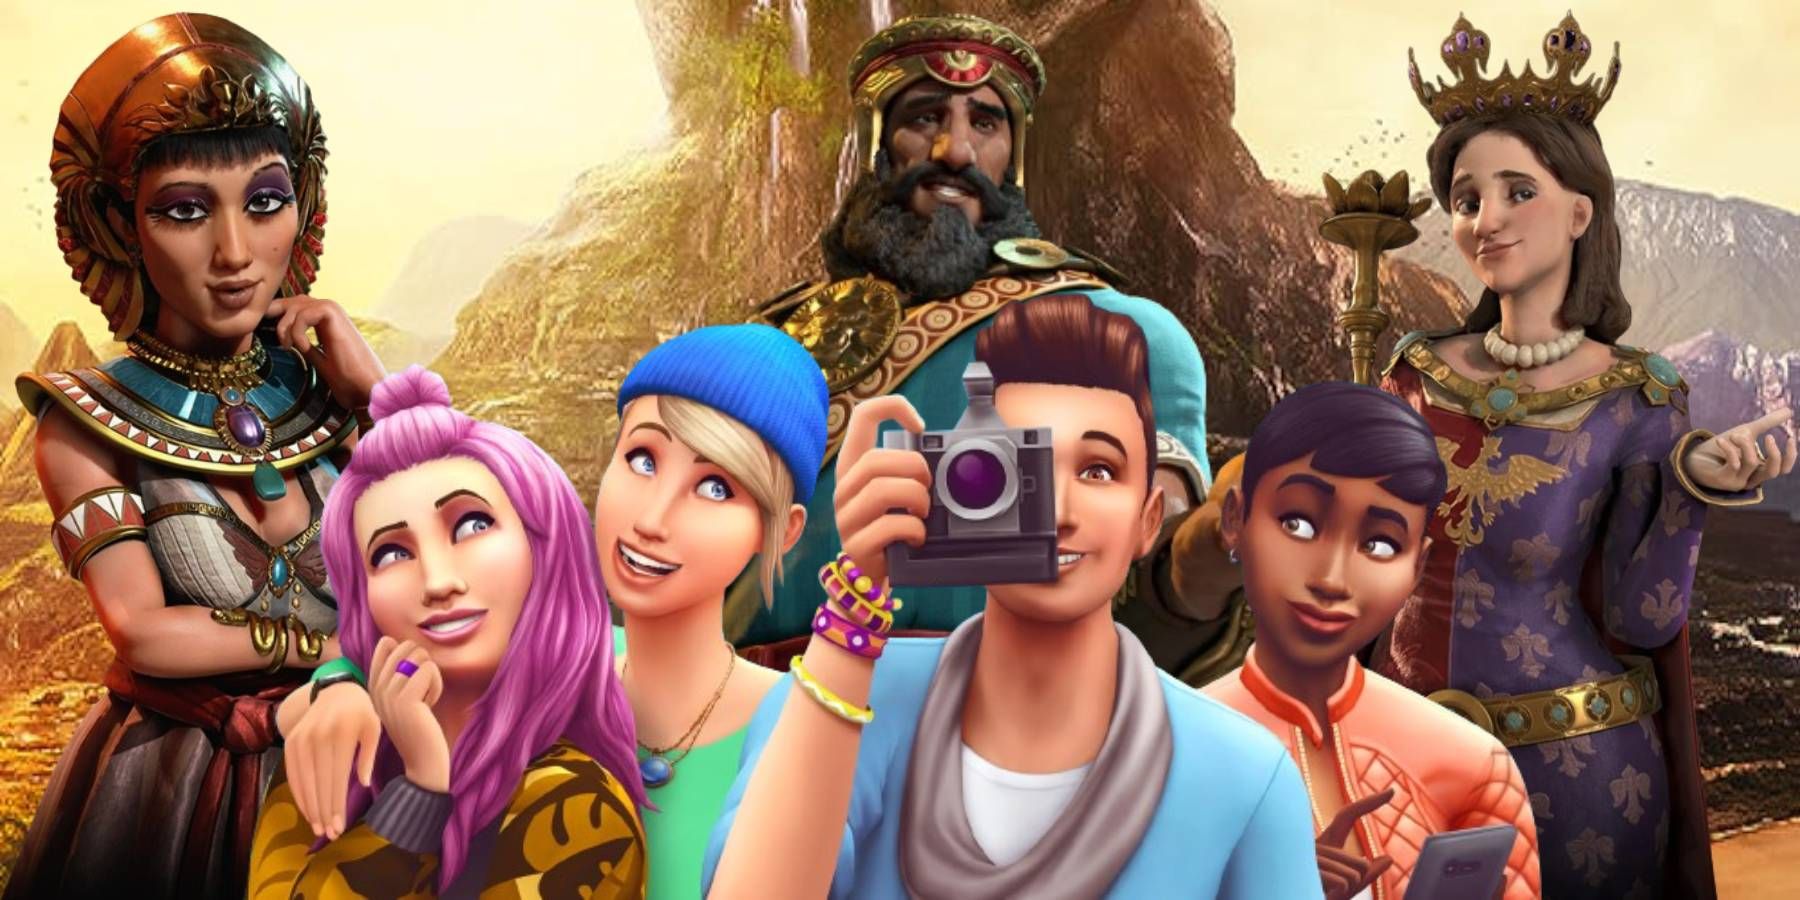 Sims from The Sims 4 with Cleopatra, Gilgamesh, and Jadwiga from Civilization 6